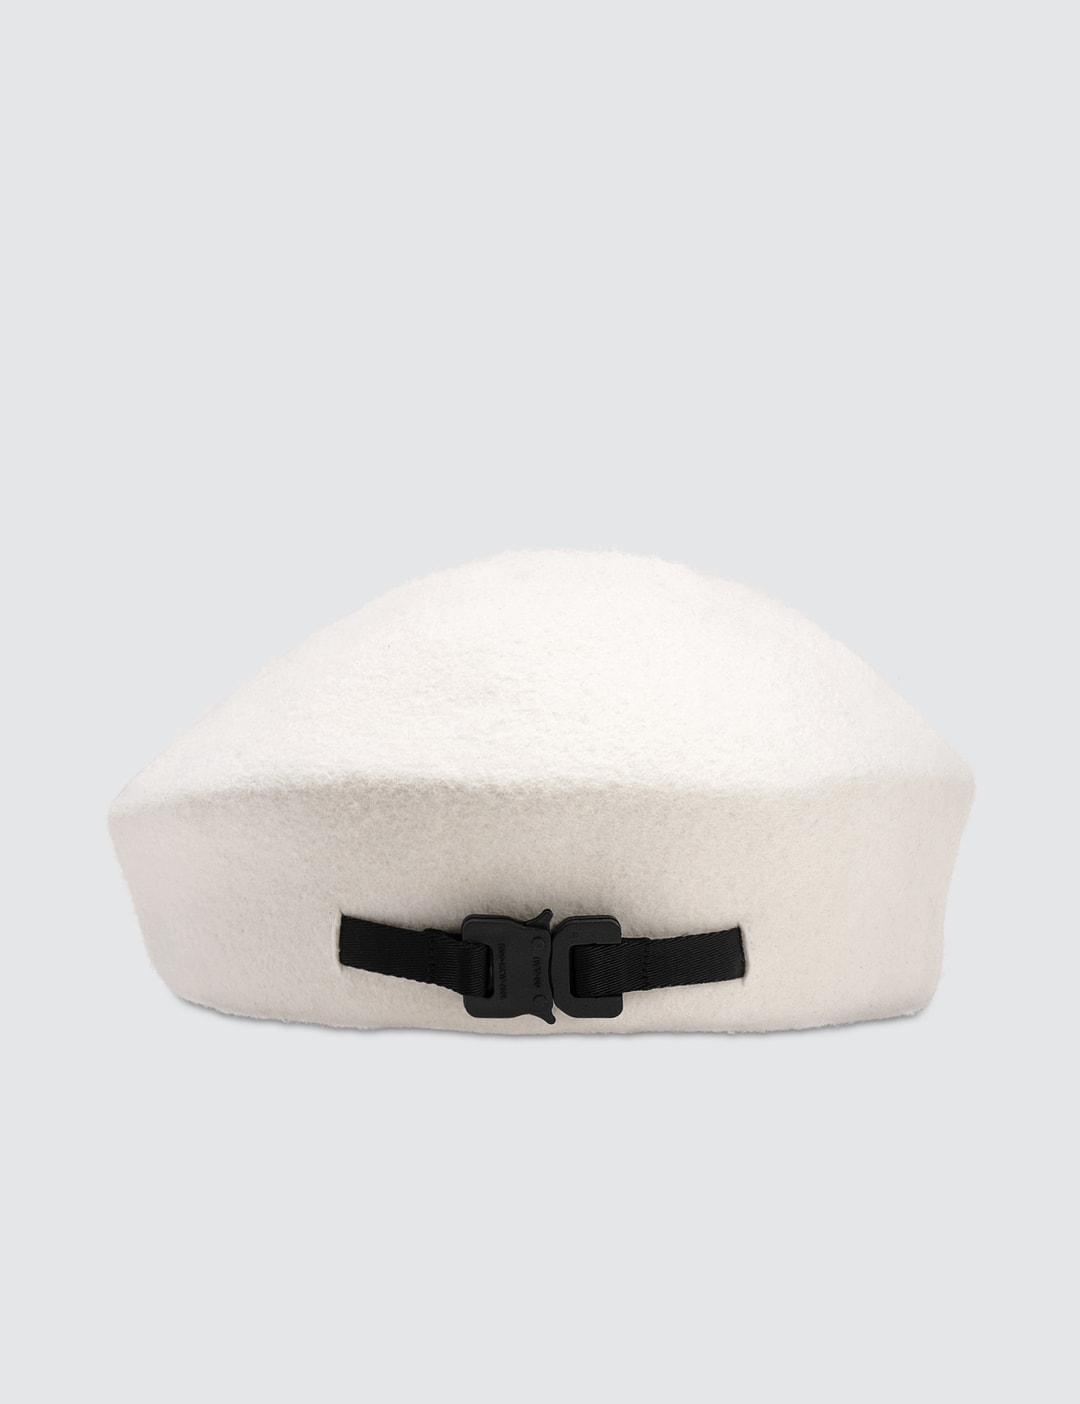 bekræfte tvetydig Genoptag 1017 ALYX 9SM - Bardot Beret | HBX - Globally Curated Fashion and Lifestyle  by Hypebeast